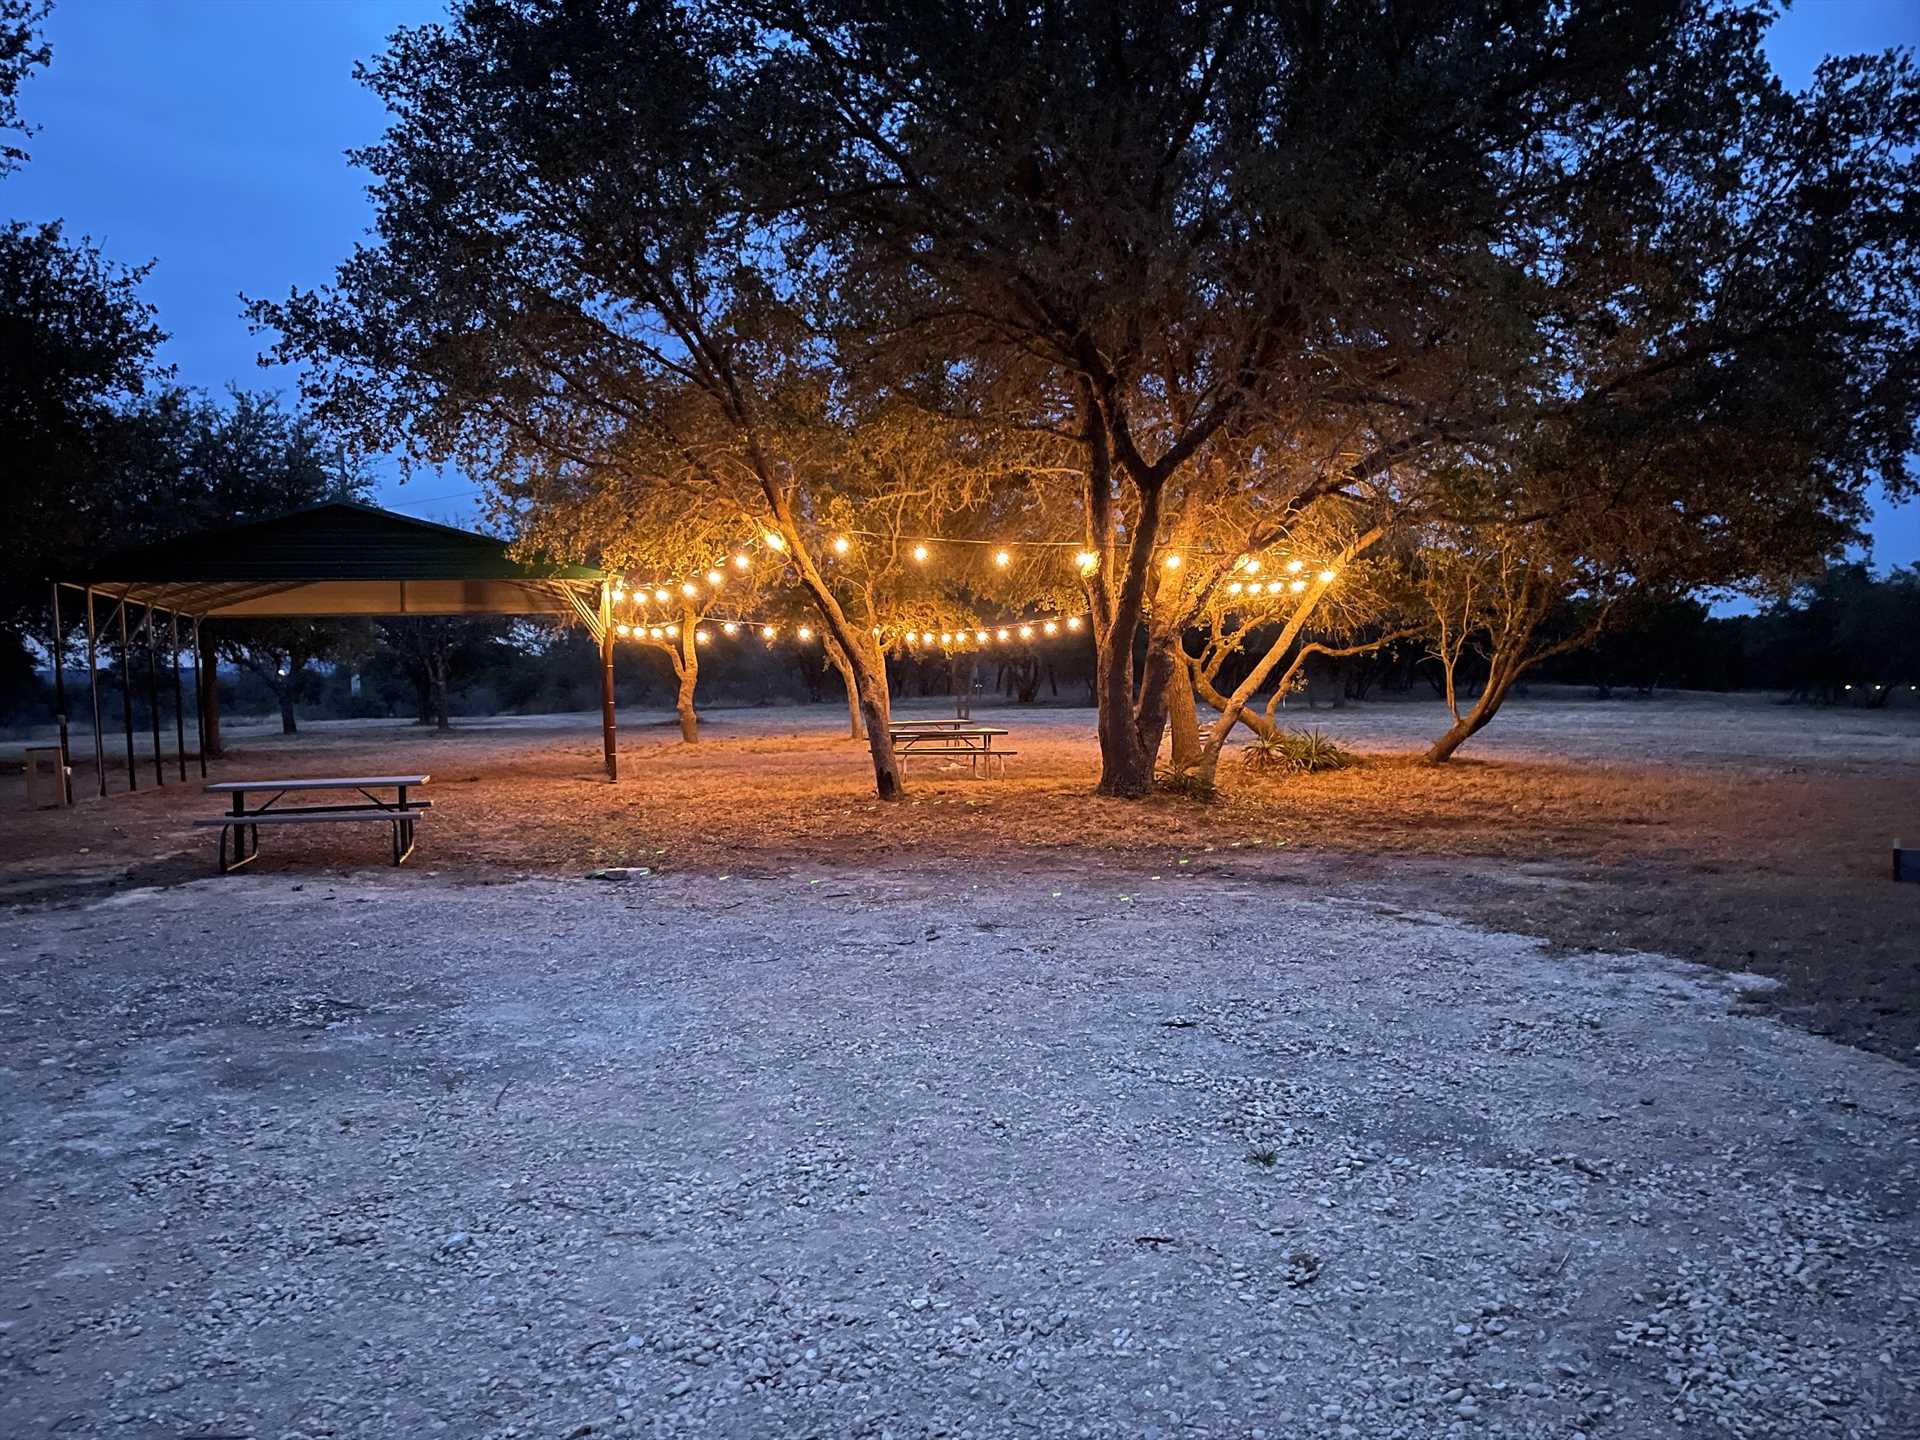                                                 String lights among the trees in the outdoor pavilion provide that special sparkle to your evenings!